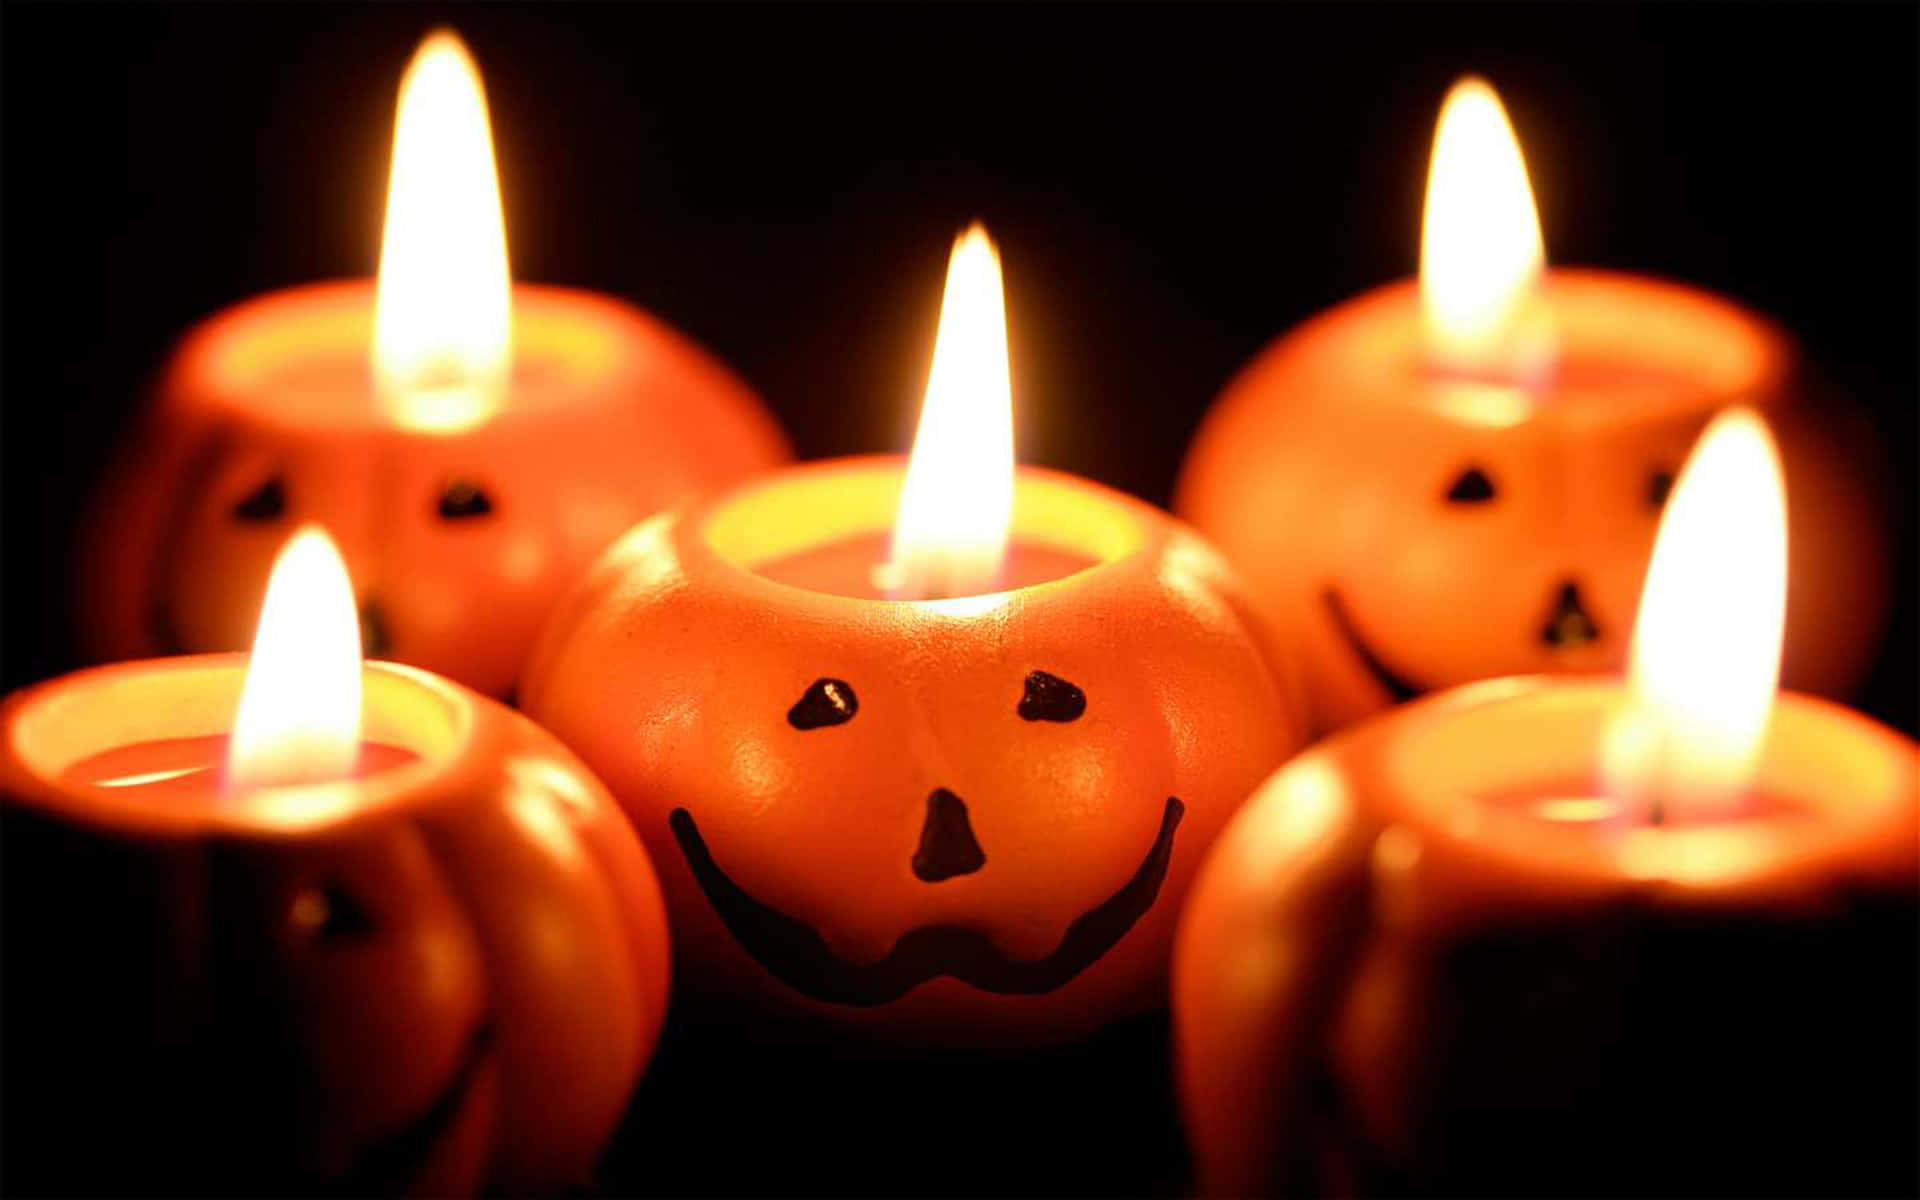 Set the mood with spooky Halloween Candles Wallpaper